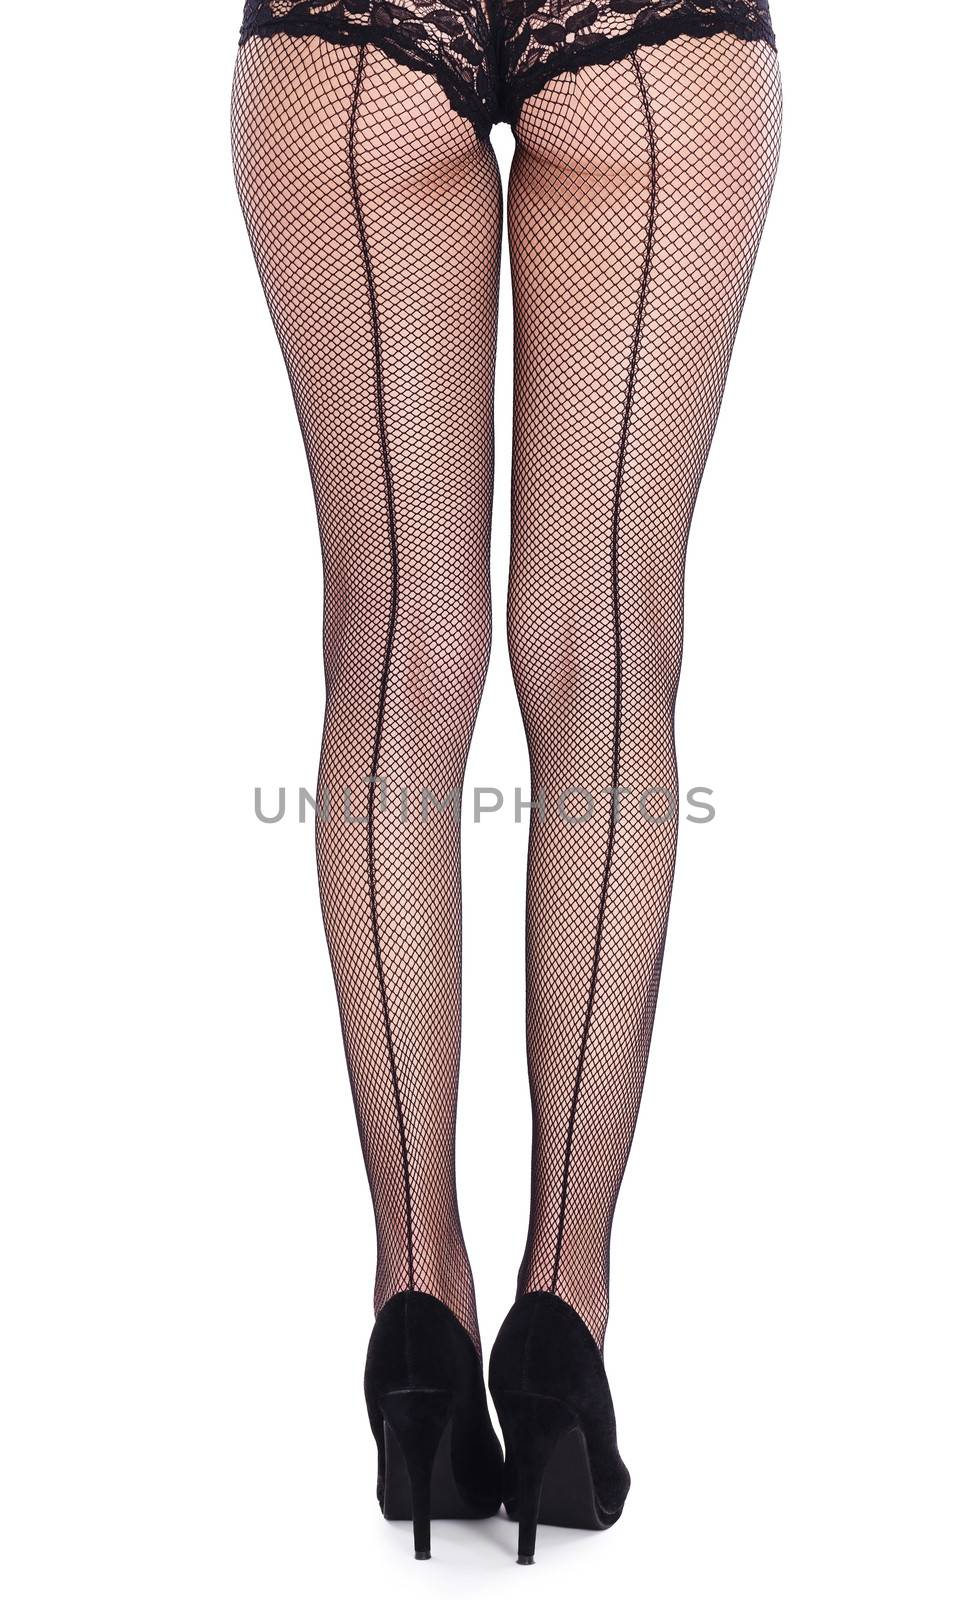 beautiful legs from behind in fish-net stockings on white background